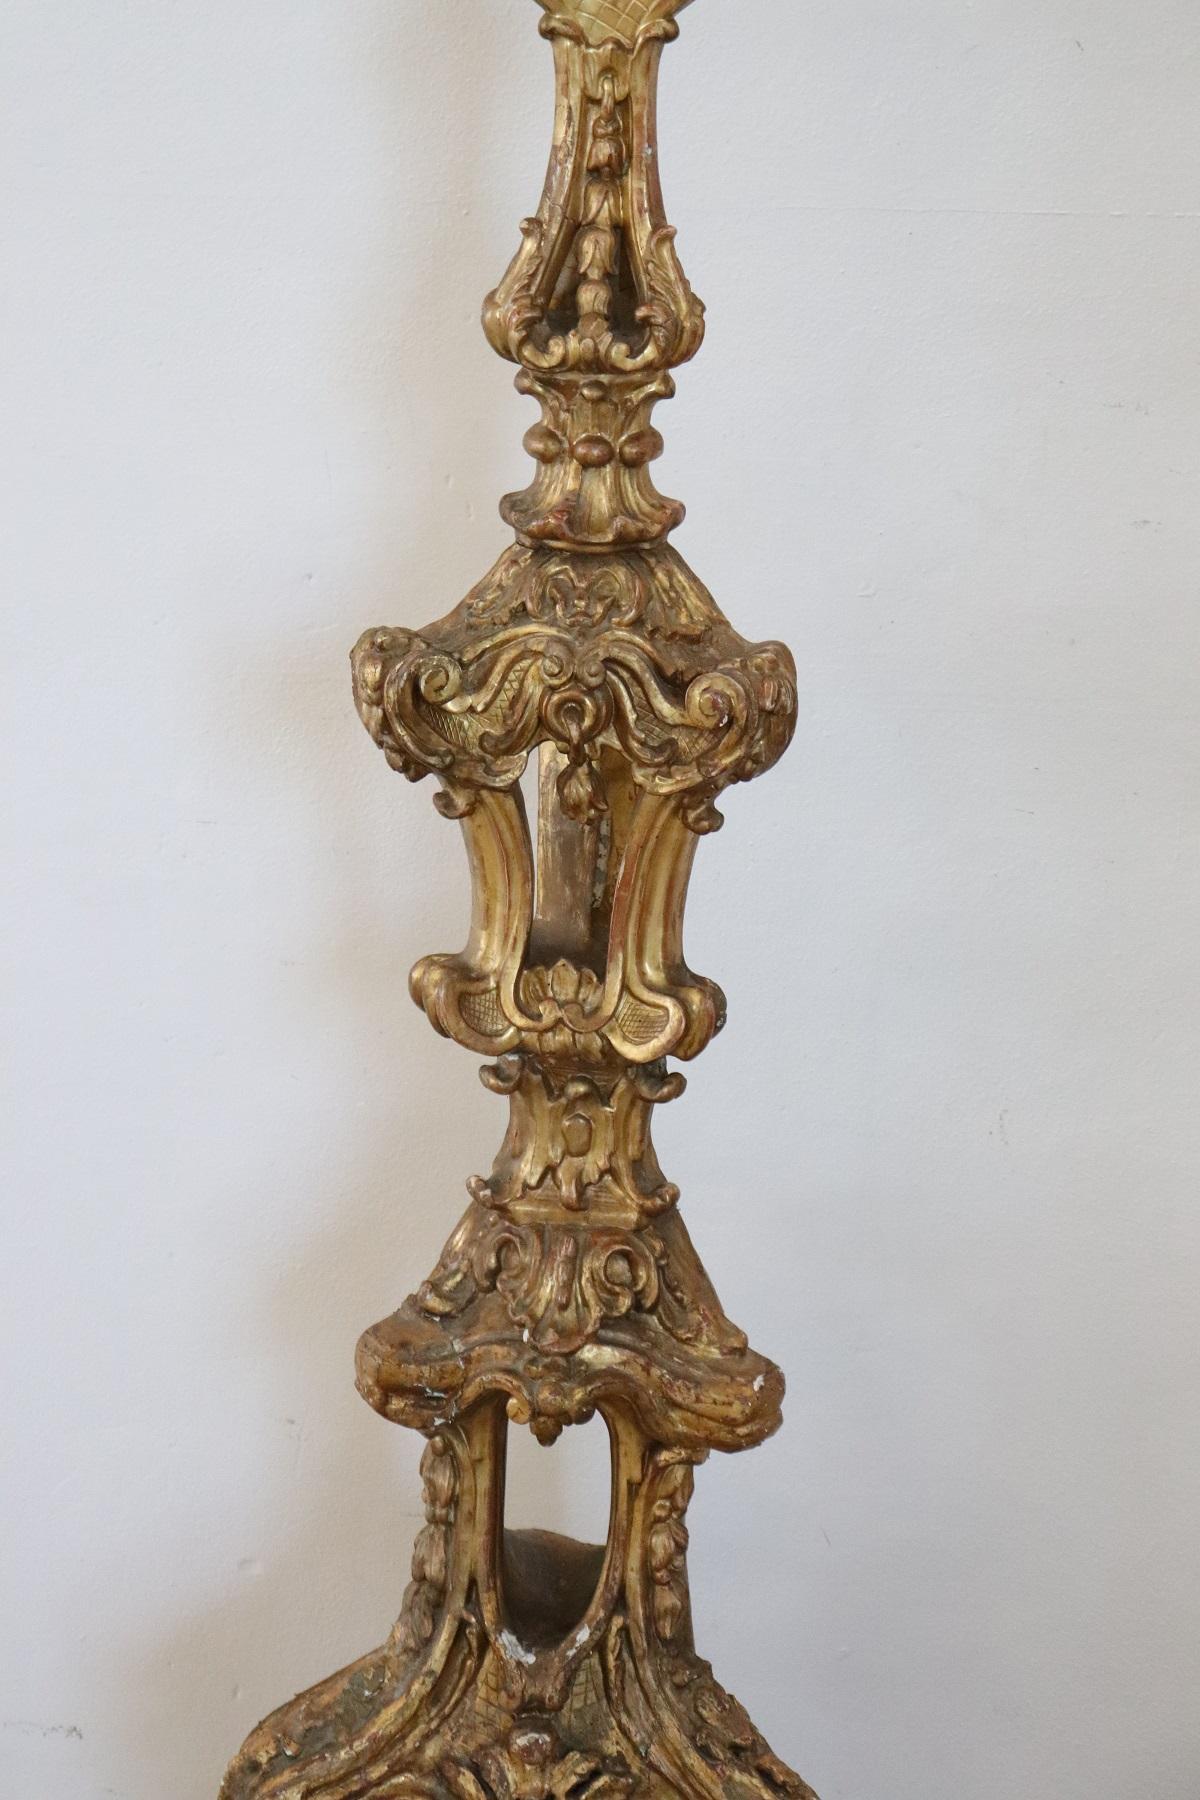 17th century Italian Louis XIV rare candelabra in carved and gilded wood with gold leaf. Very high it becomes an important piece of furniture in your home.